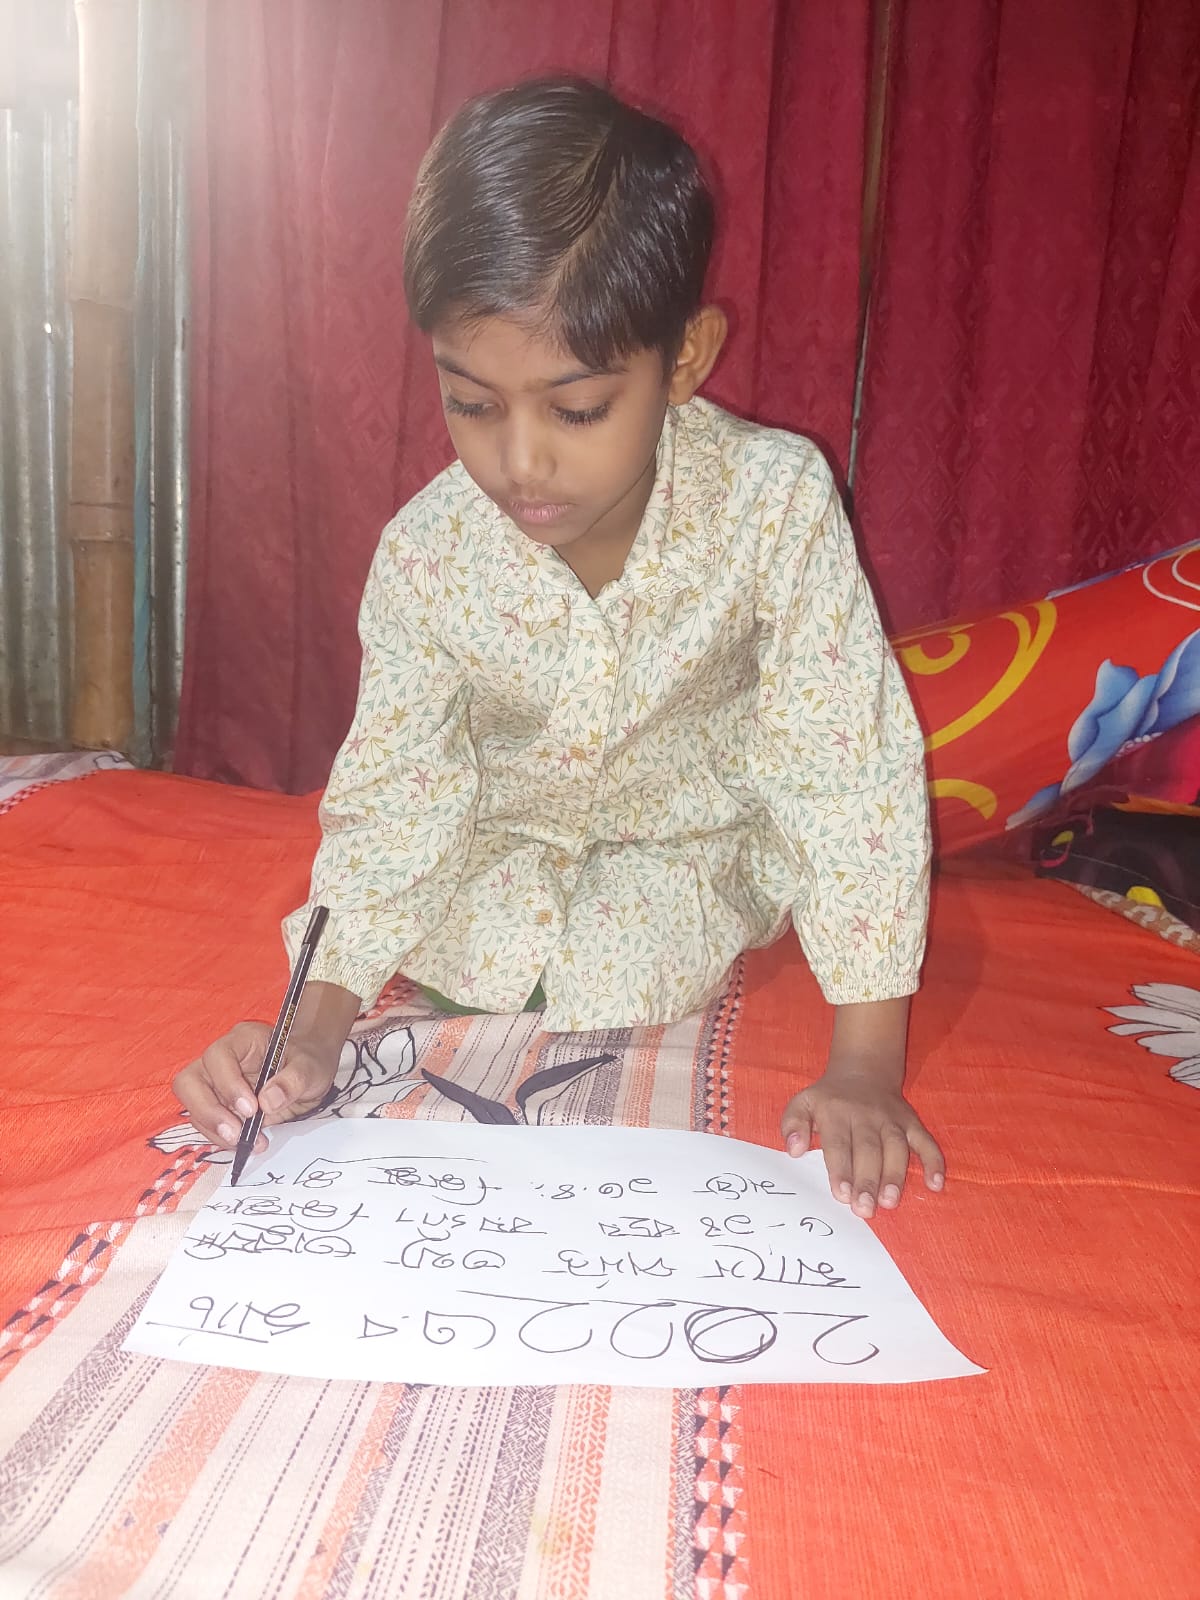 Nusrat made a card on awareness against child labor